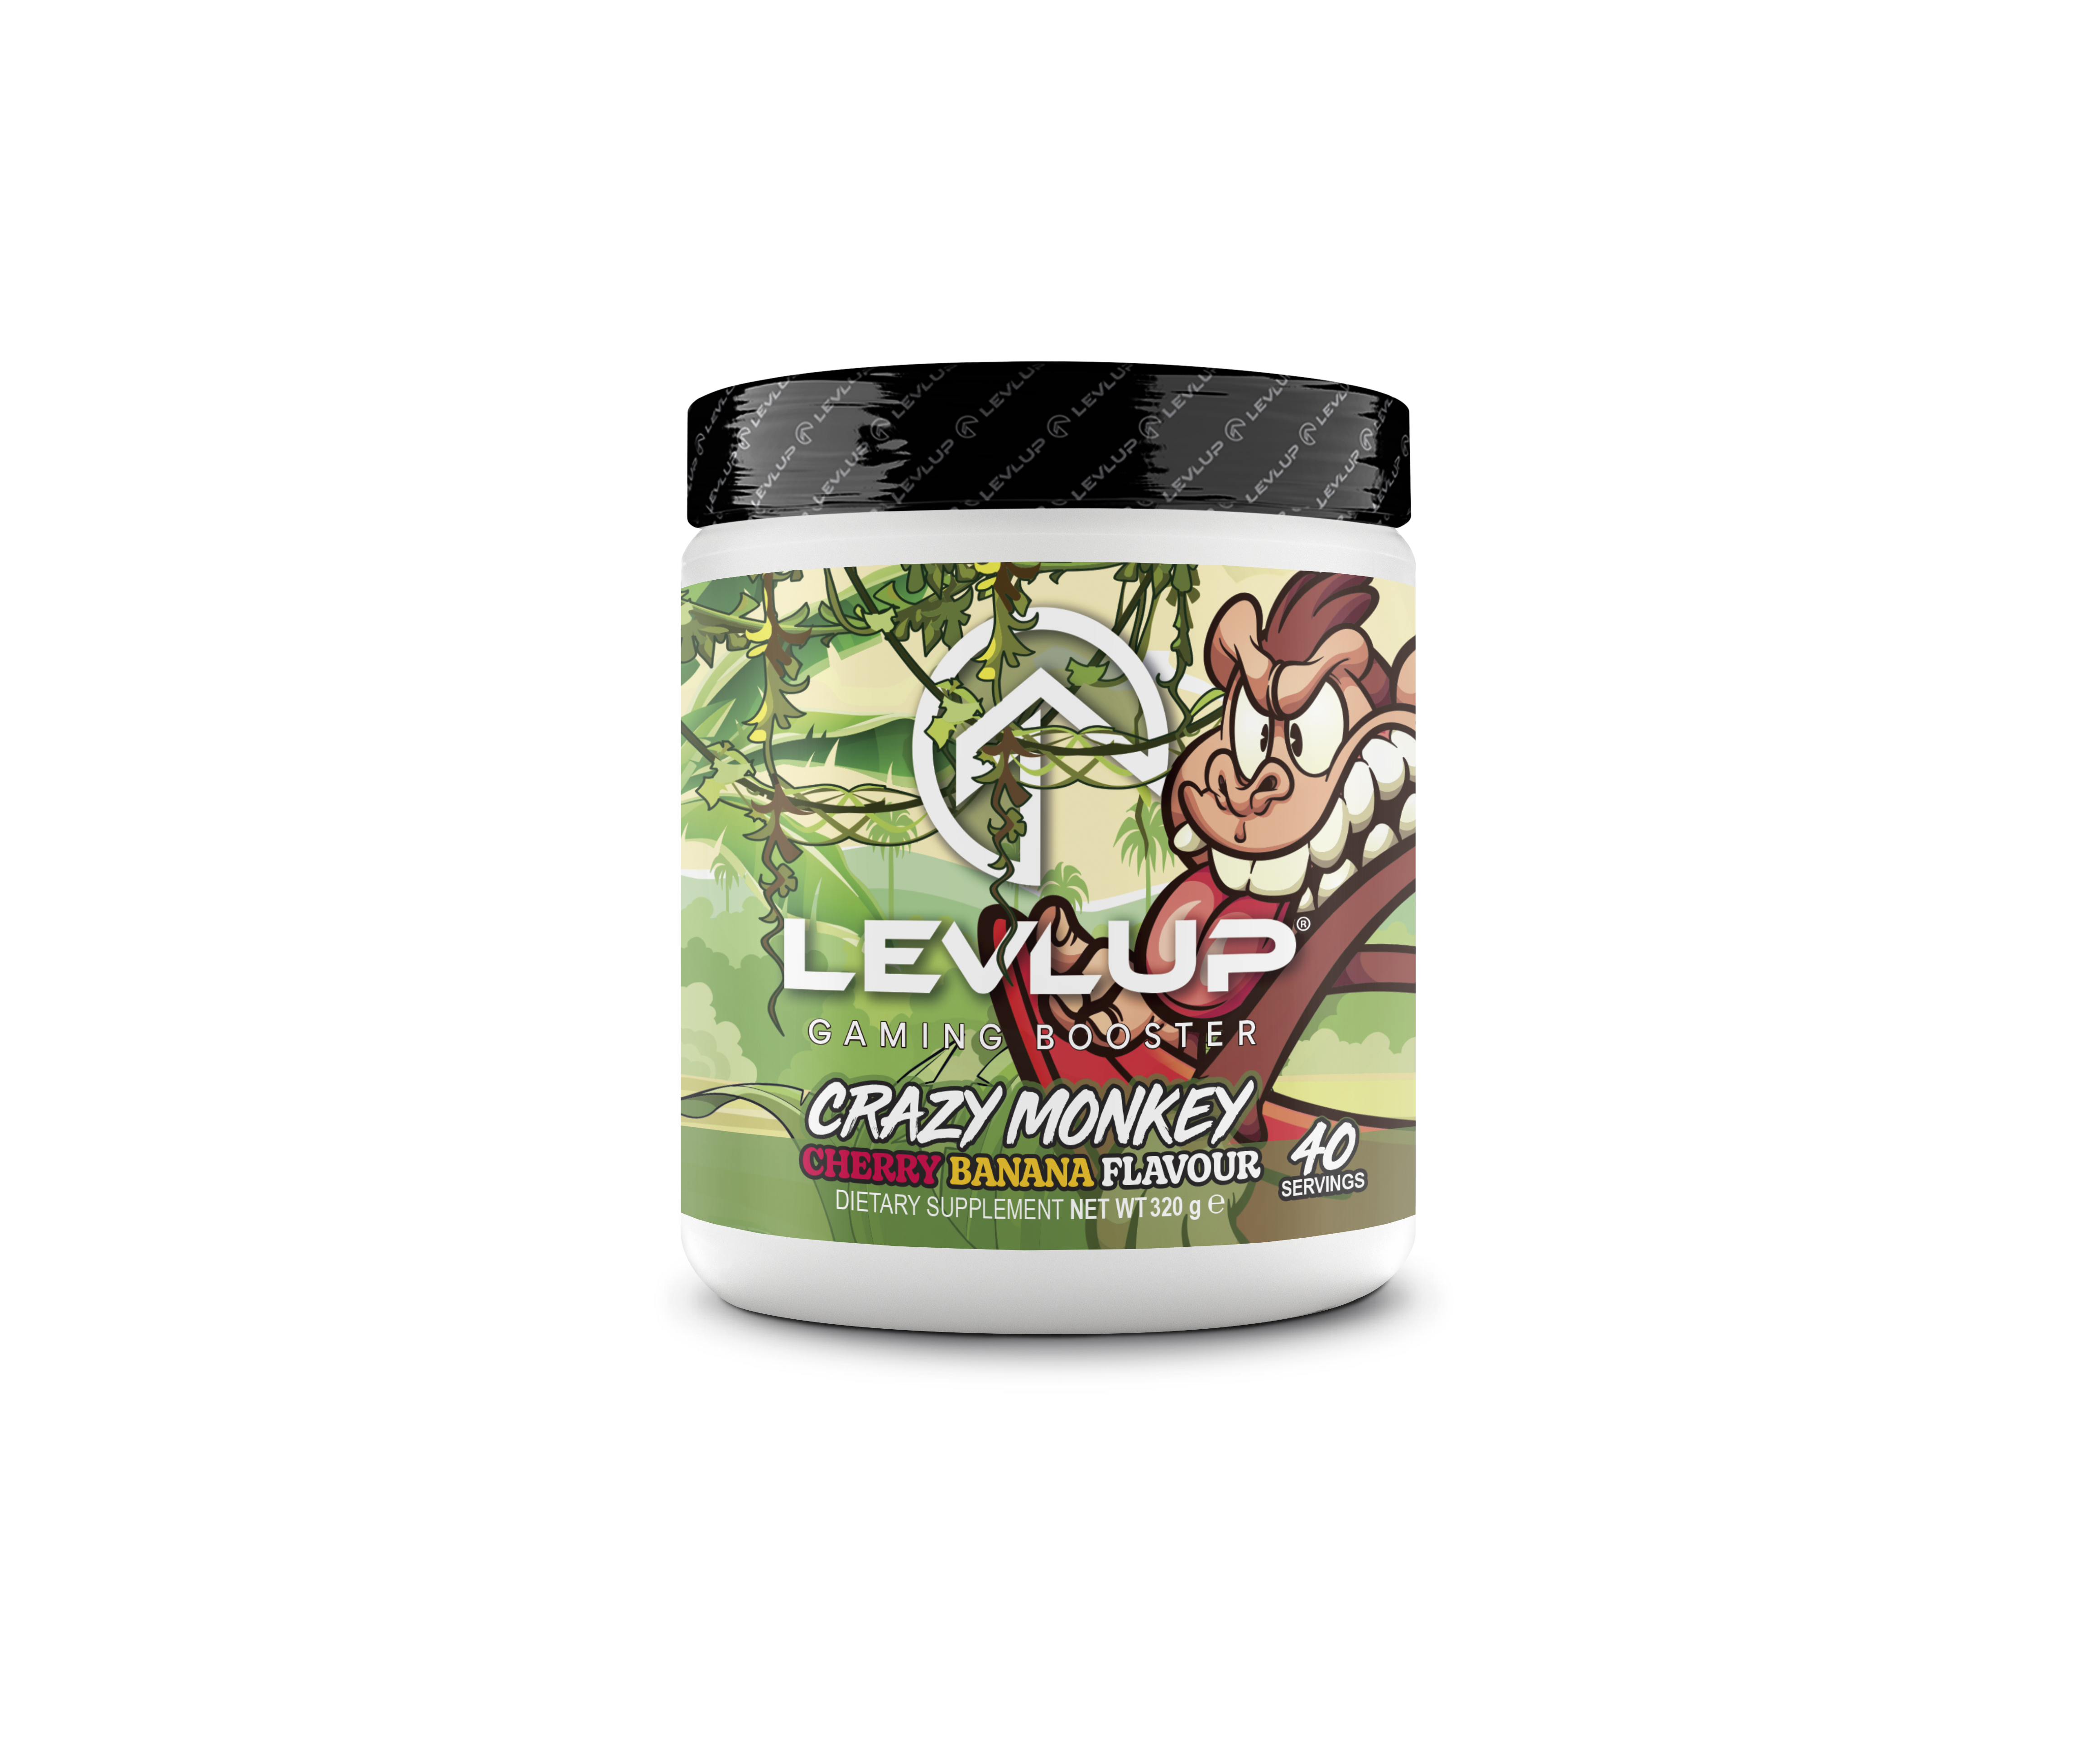 LevlUp Gaming Booster - Super Nutrition